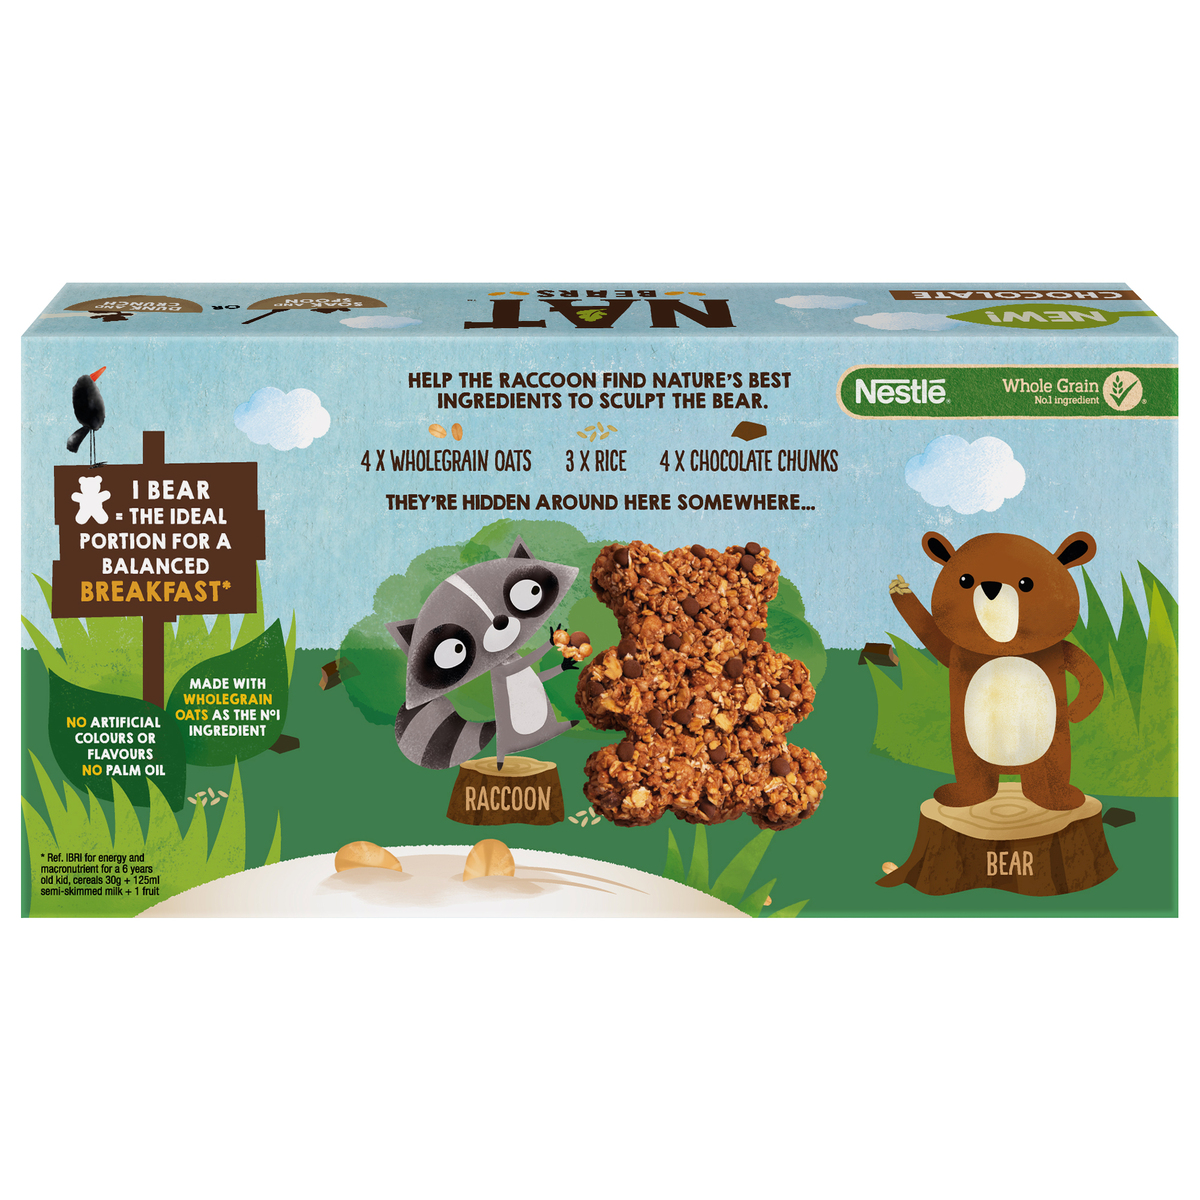 NAT Bear Cereals with Chocolate 6 x 32g